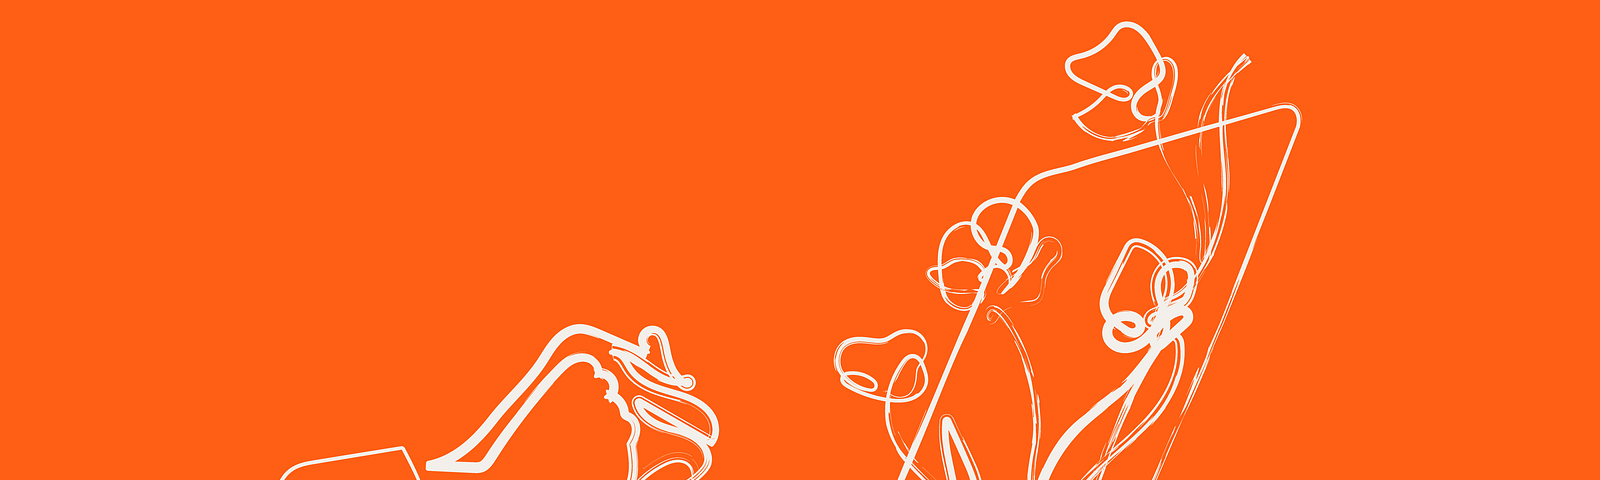 orange background with white, thin single line art image of hands on a laptop keyboard and flowers coming out of the monitor